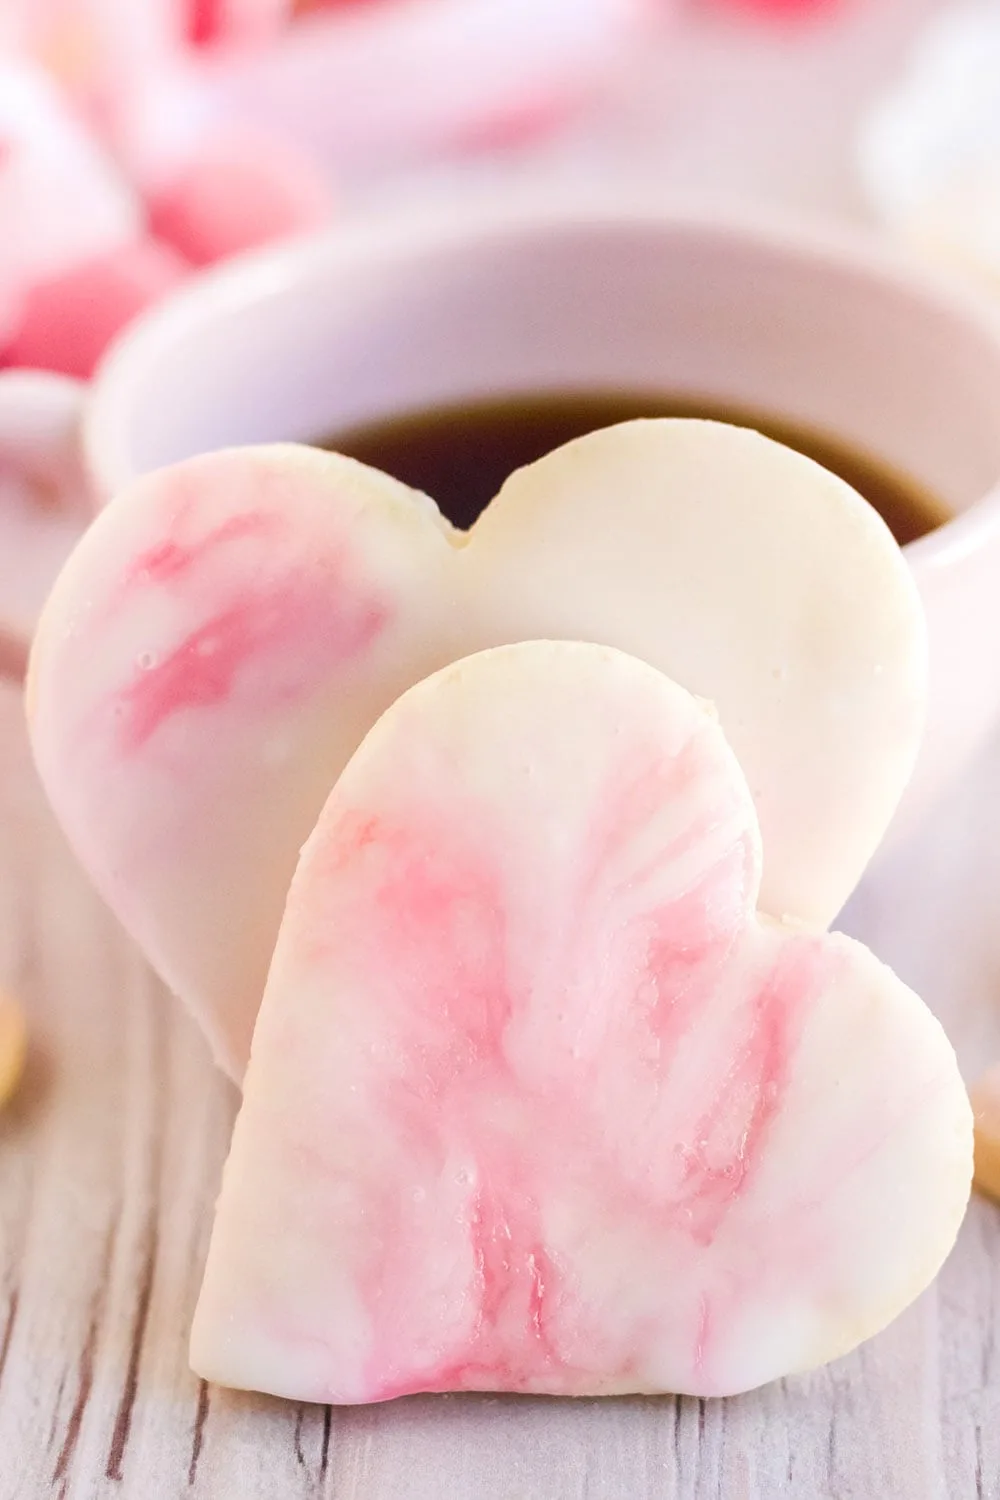 Two Valentine's day cookies in front of a cup of coffee.